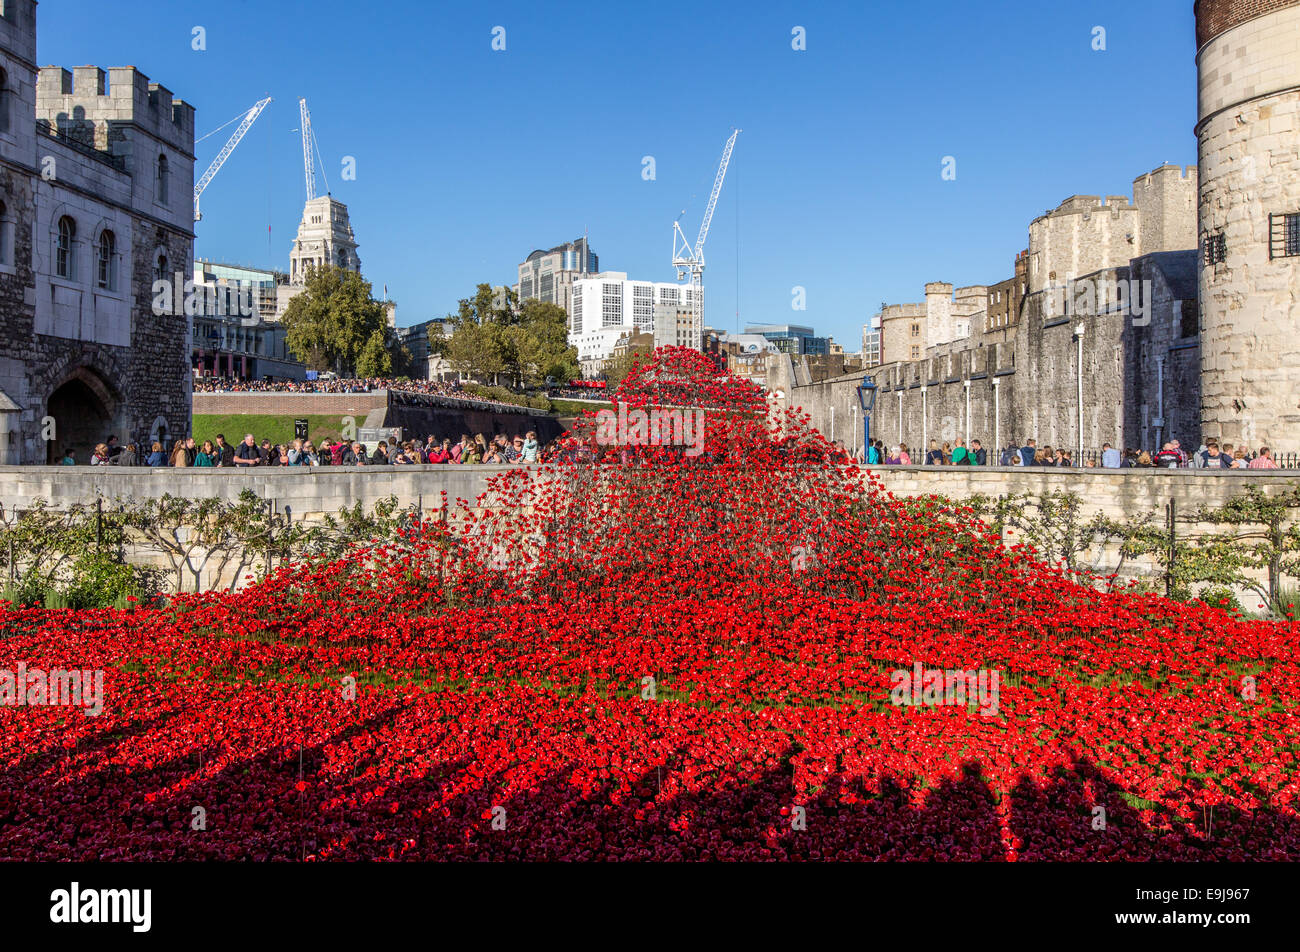 Blood Swept Lands and Seas of Red - Poppies Tower of London UK Stock Photo